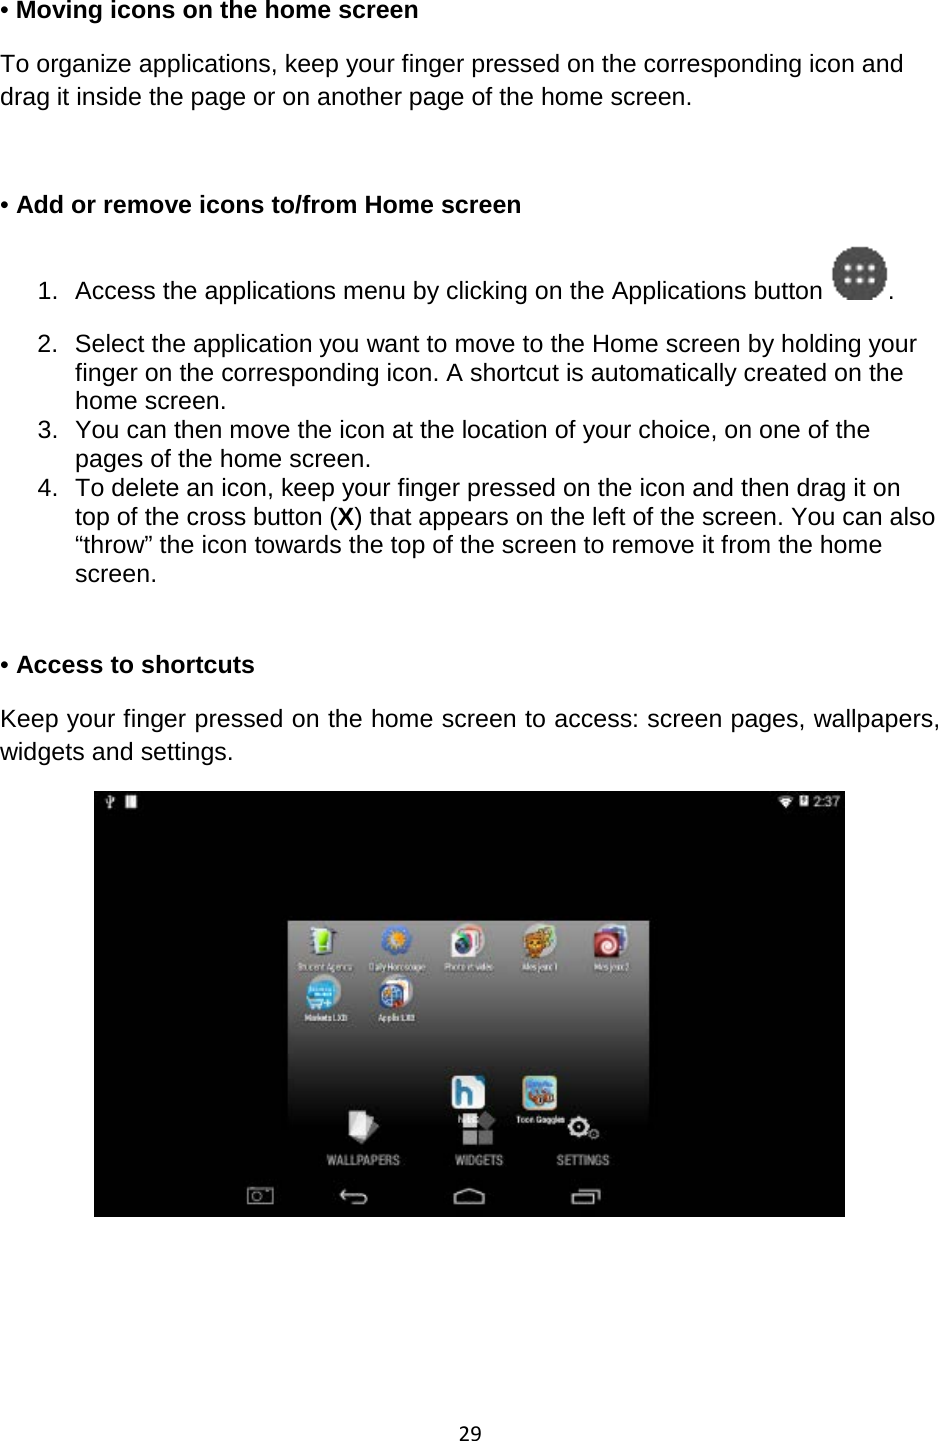 29  • Moving icons on the home screen  To organize applications, keep your finger pressed on the corresponding icon and drag it inside the page or on another page of the home screen.   • Add or remove icons to/from Home screen 1. Access the applications menu by clicking on the Applications button . 2. Select the application you want to move to the Home screen by holding your finger on the corresponding icon. A shortcut is automatically created on the home screen. 3. You can then move the icon at the location of your choice, on one of the pages of the home screen. 4. To delete an icon, keep your finger pressed on the icon and then drag it on top of the cross button (X) that appears on the left of the screen. You can also “throw” the icon towards the top of the screen to remove it from the home screen.    • Access to shortcuts  Keep your finger pressed on the home screen to access: screen pages, wallpapers, widgets and settings.      